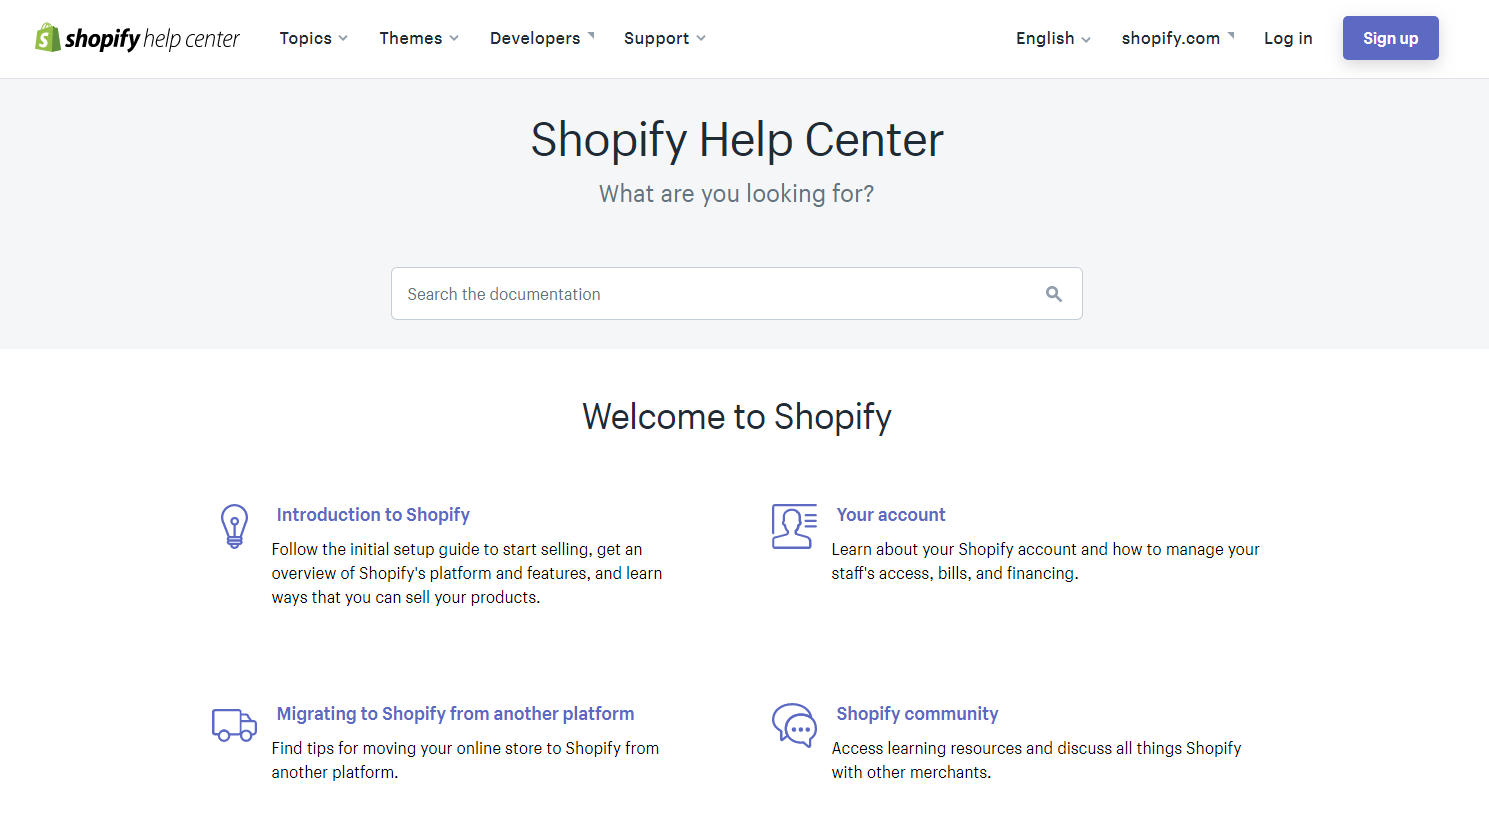 The Shopify Help center page.